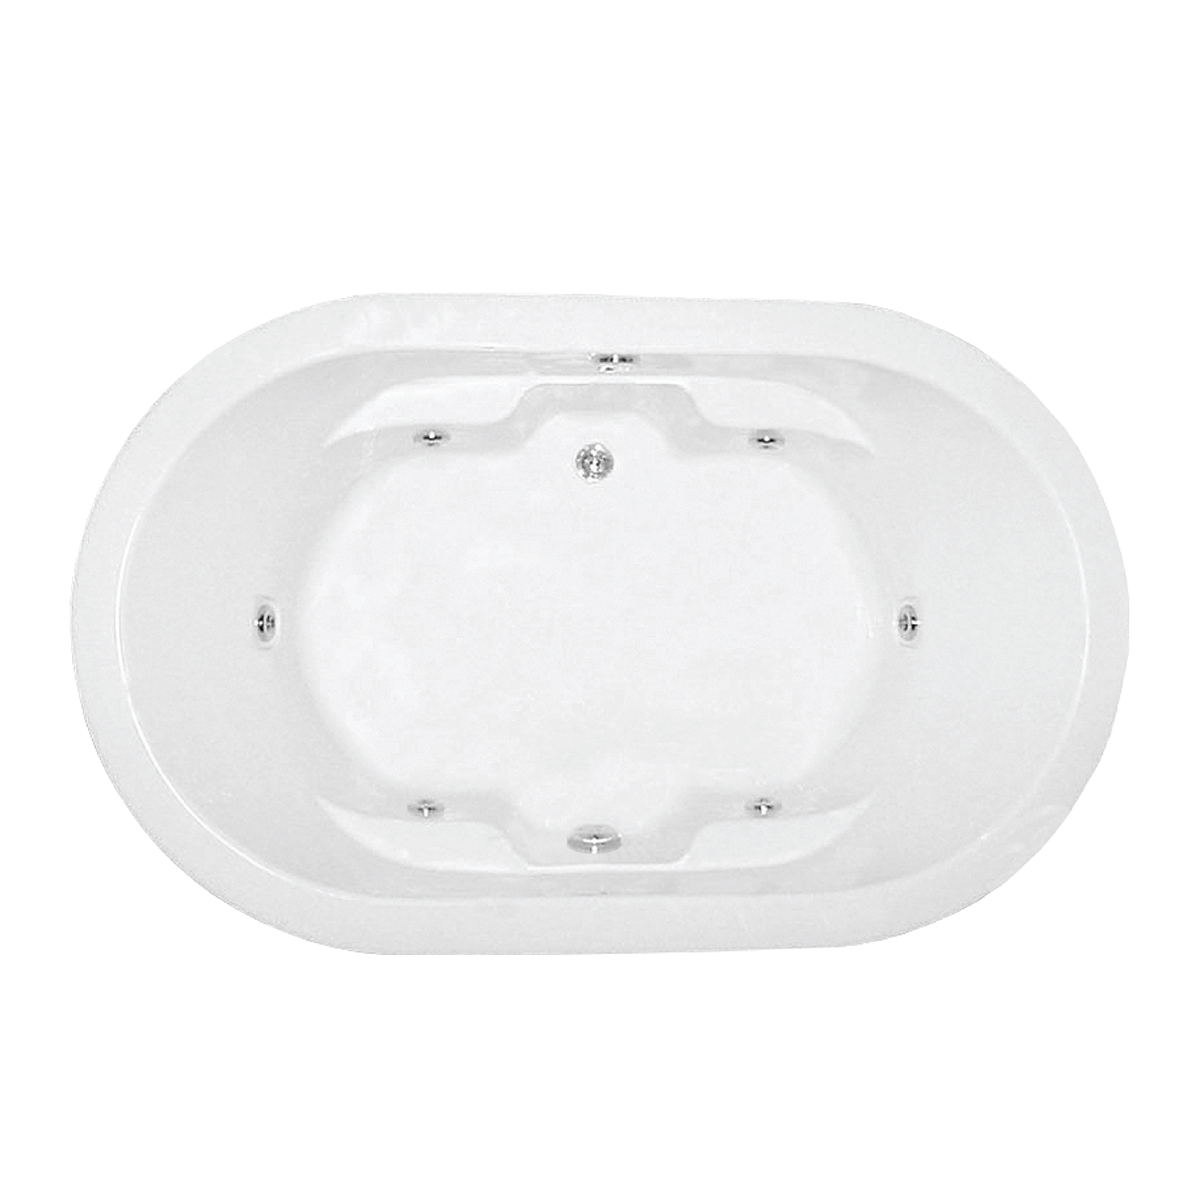 Jacob Delafon e6d015-00 Adjustable Fitting with Extra-Flat Trap with  Overflow, White 